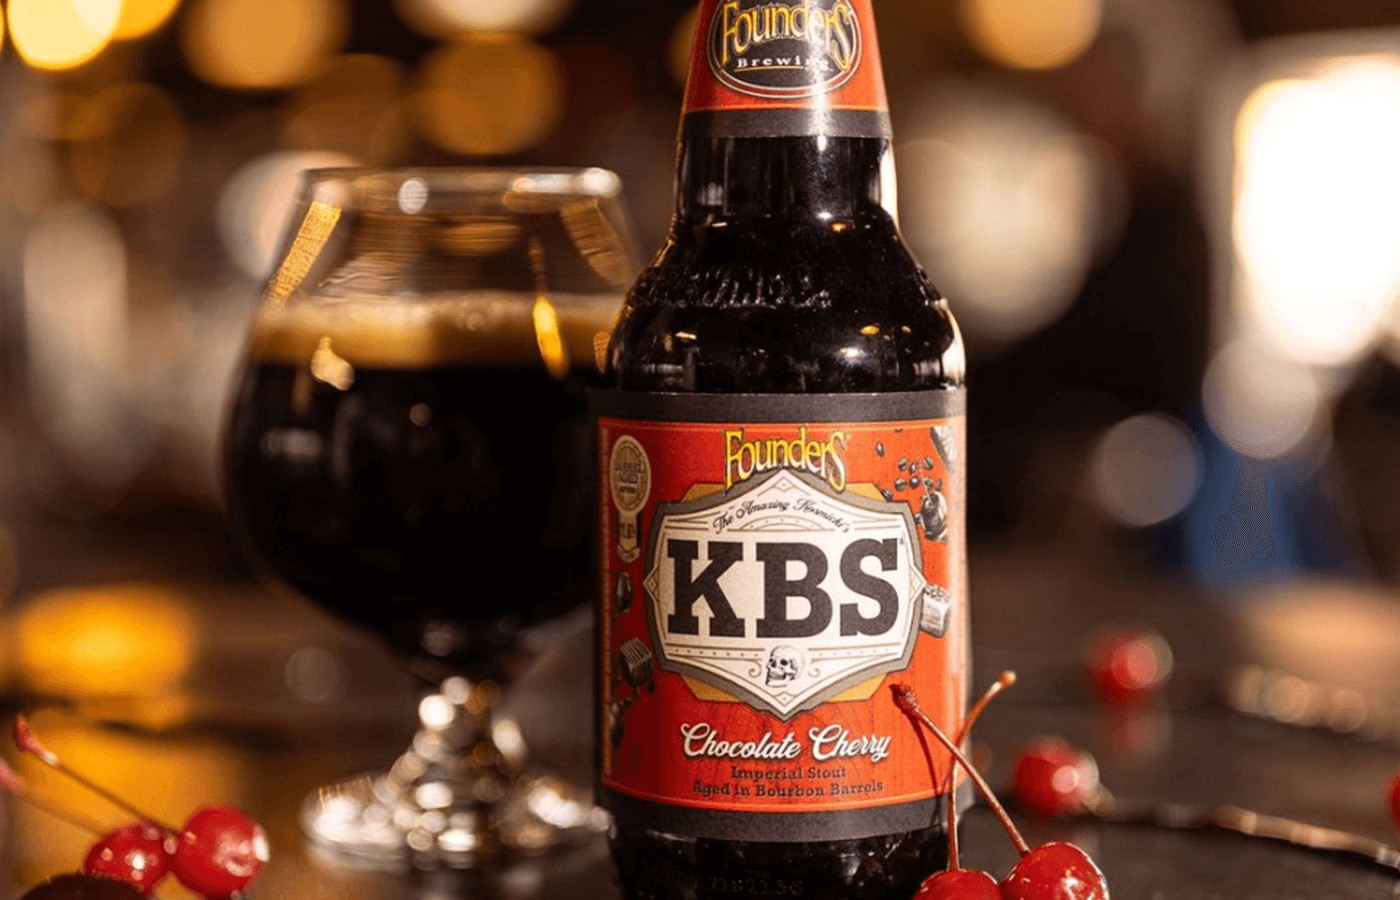 KBS Chocolate Cherry bottle and snifter pour